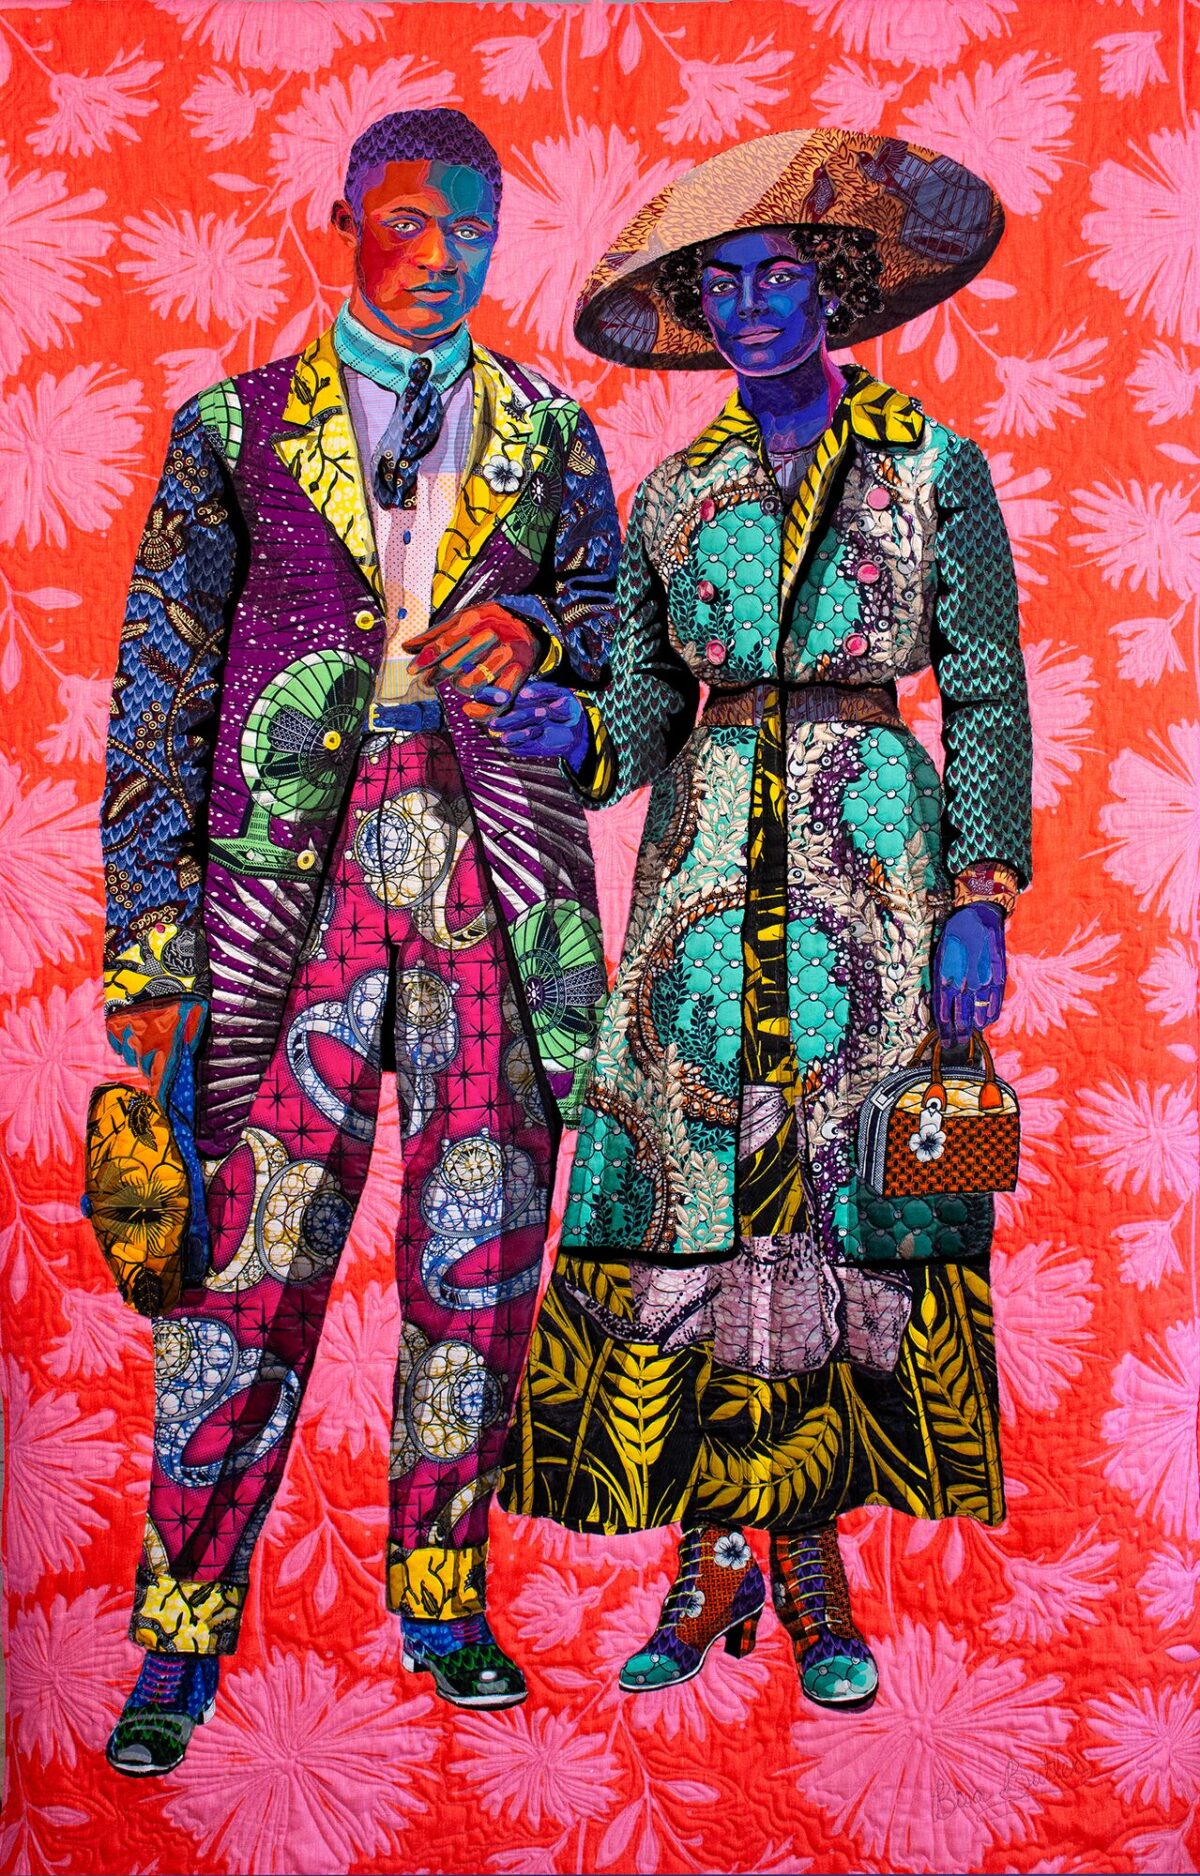 Vibrant Portraits Painted With Patterned Fabrics By Bisa Butler 4